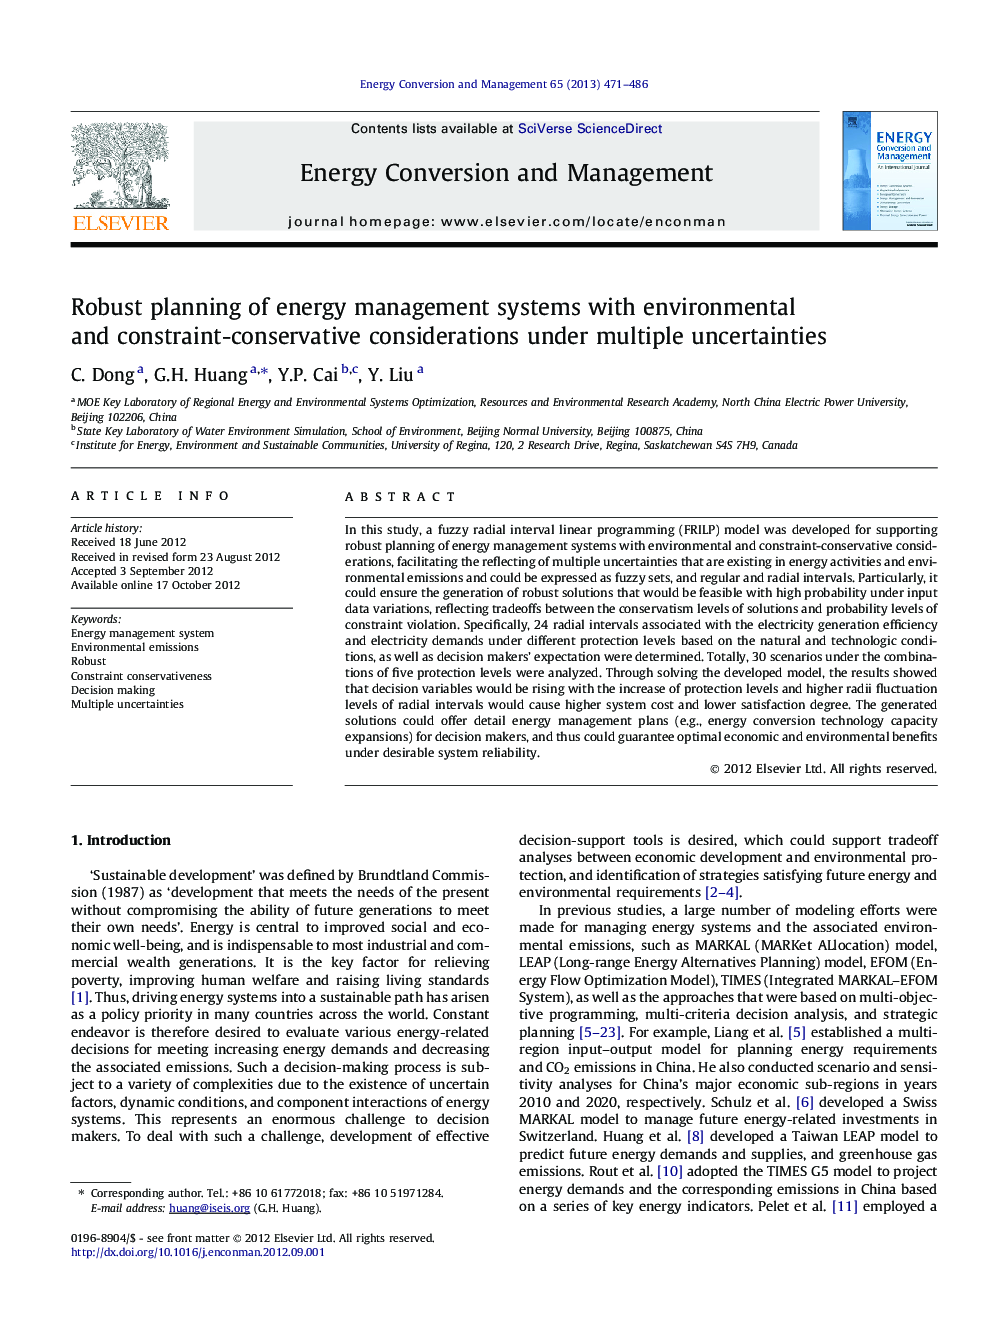 Robust planning of energy management systems with environmental and constraint-conservative considerations under multiple uncertainties